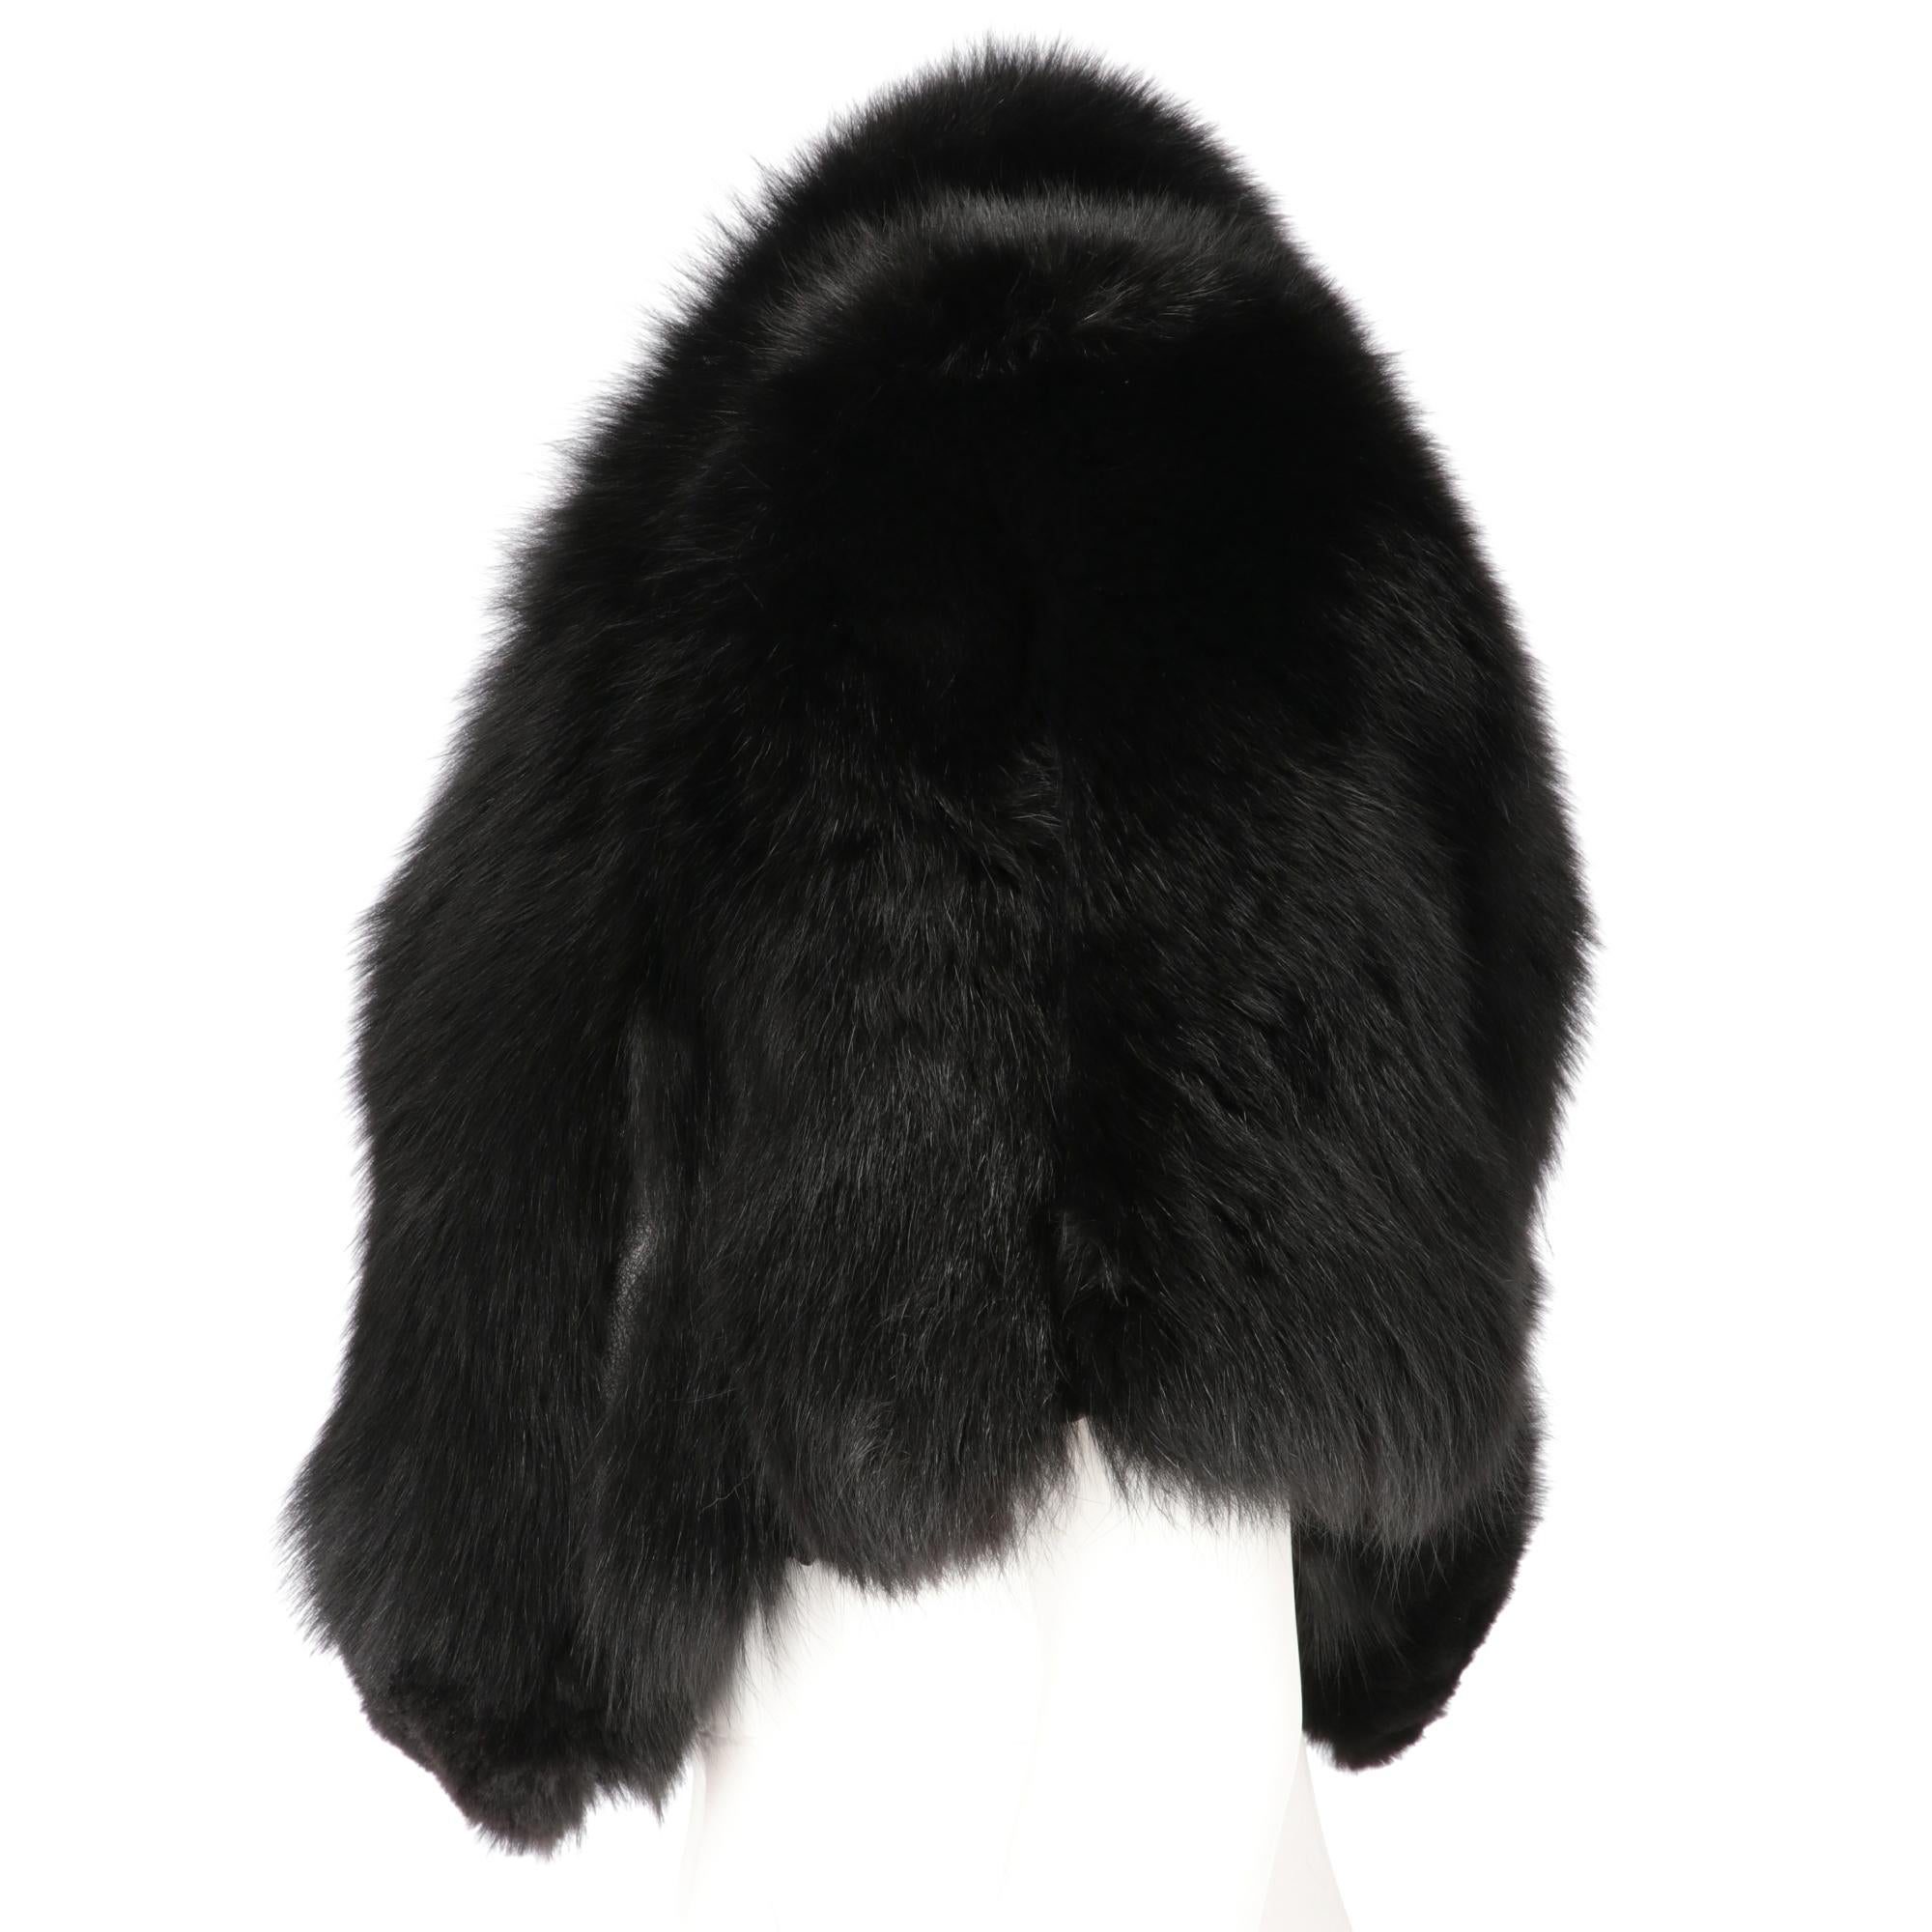 Real short-hair Groenlandia black fox fur, short to the waist, with padded shoulders, with leather inserts, elastic bands and hooks for the arms, lined in silk fabric.

This item belongs to an original vintage stock: it has never been worn and comes